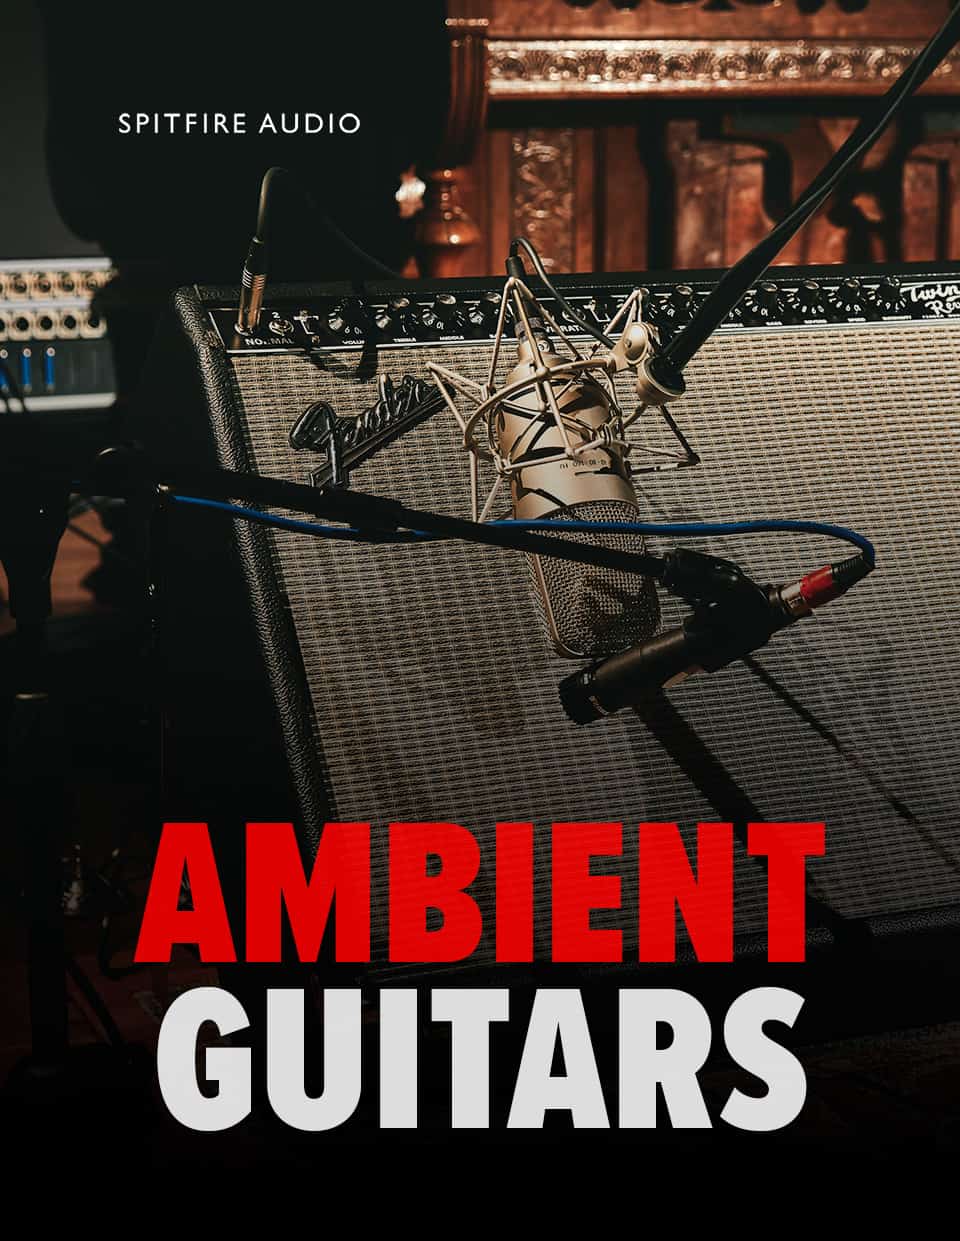 Ambient Guitars Review - a Contemporary Sounds & Noises, Textures, and Loops Guitar Library by Spitfire Audio